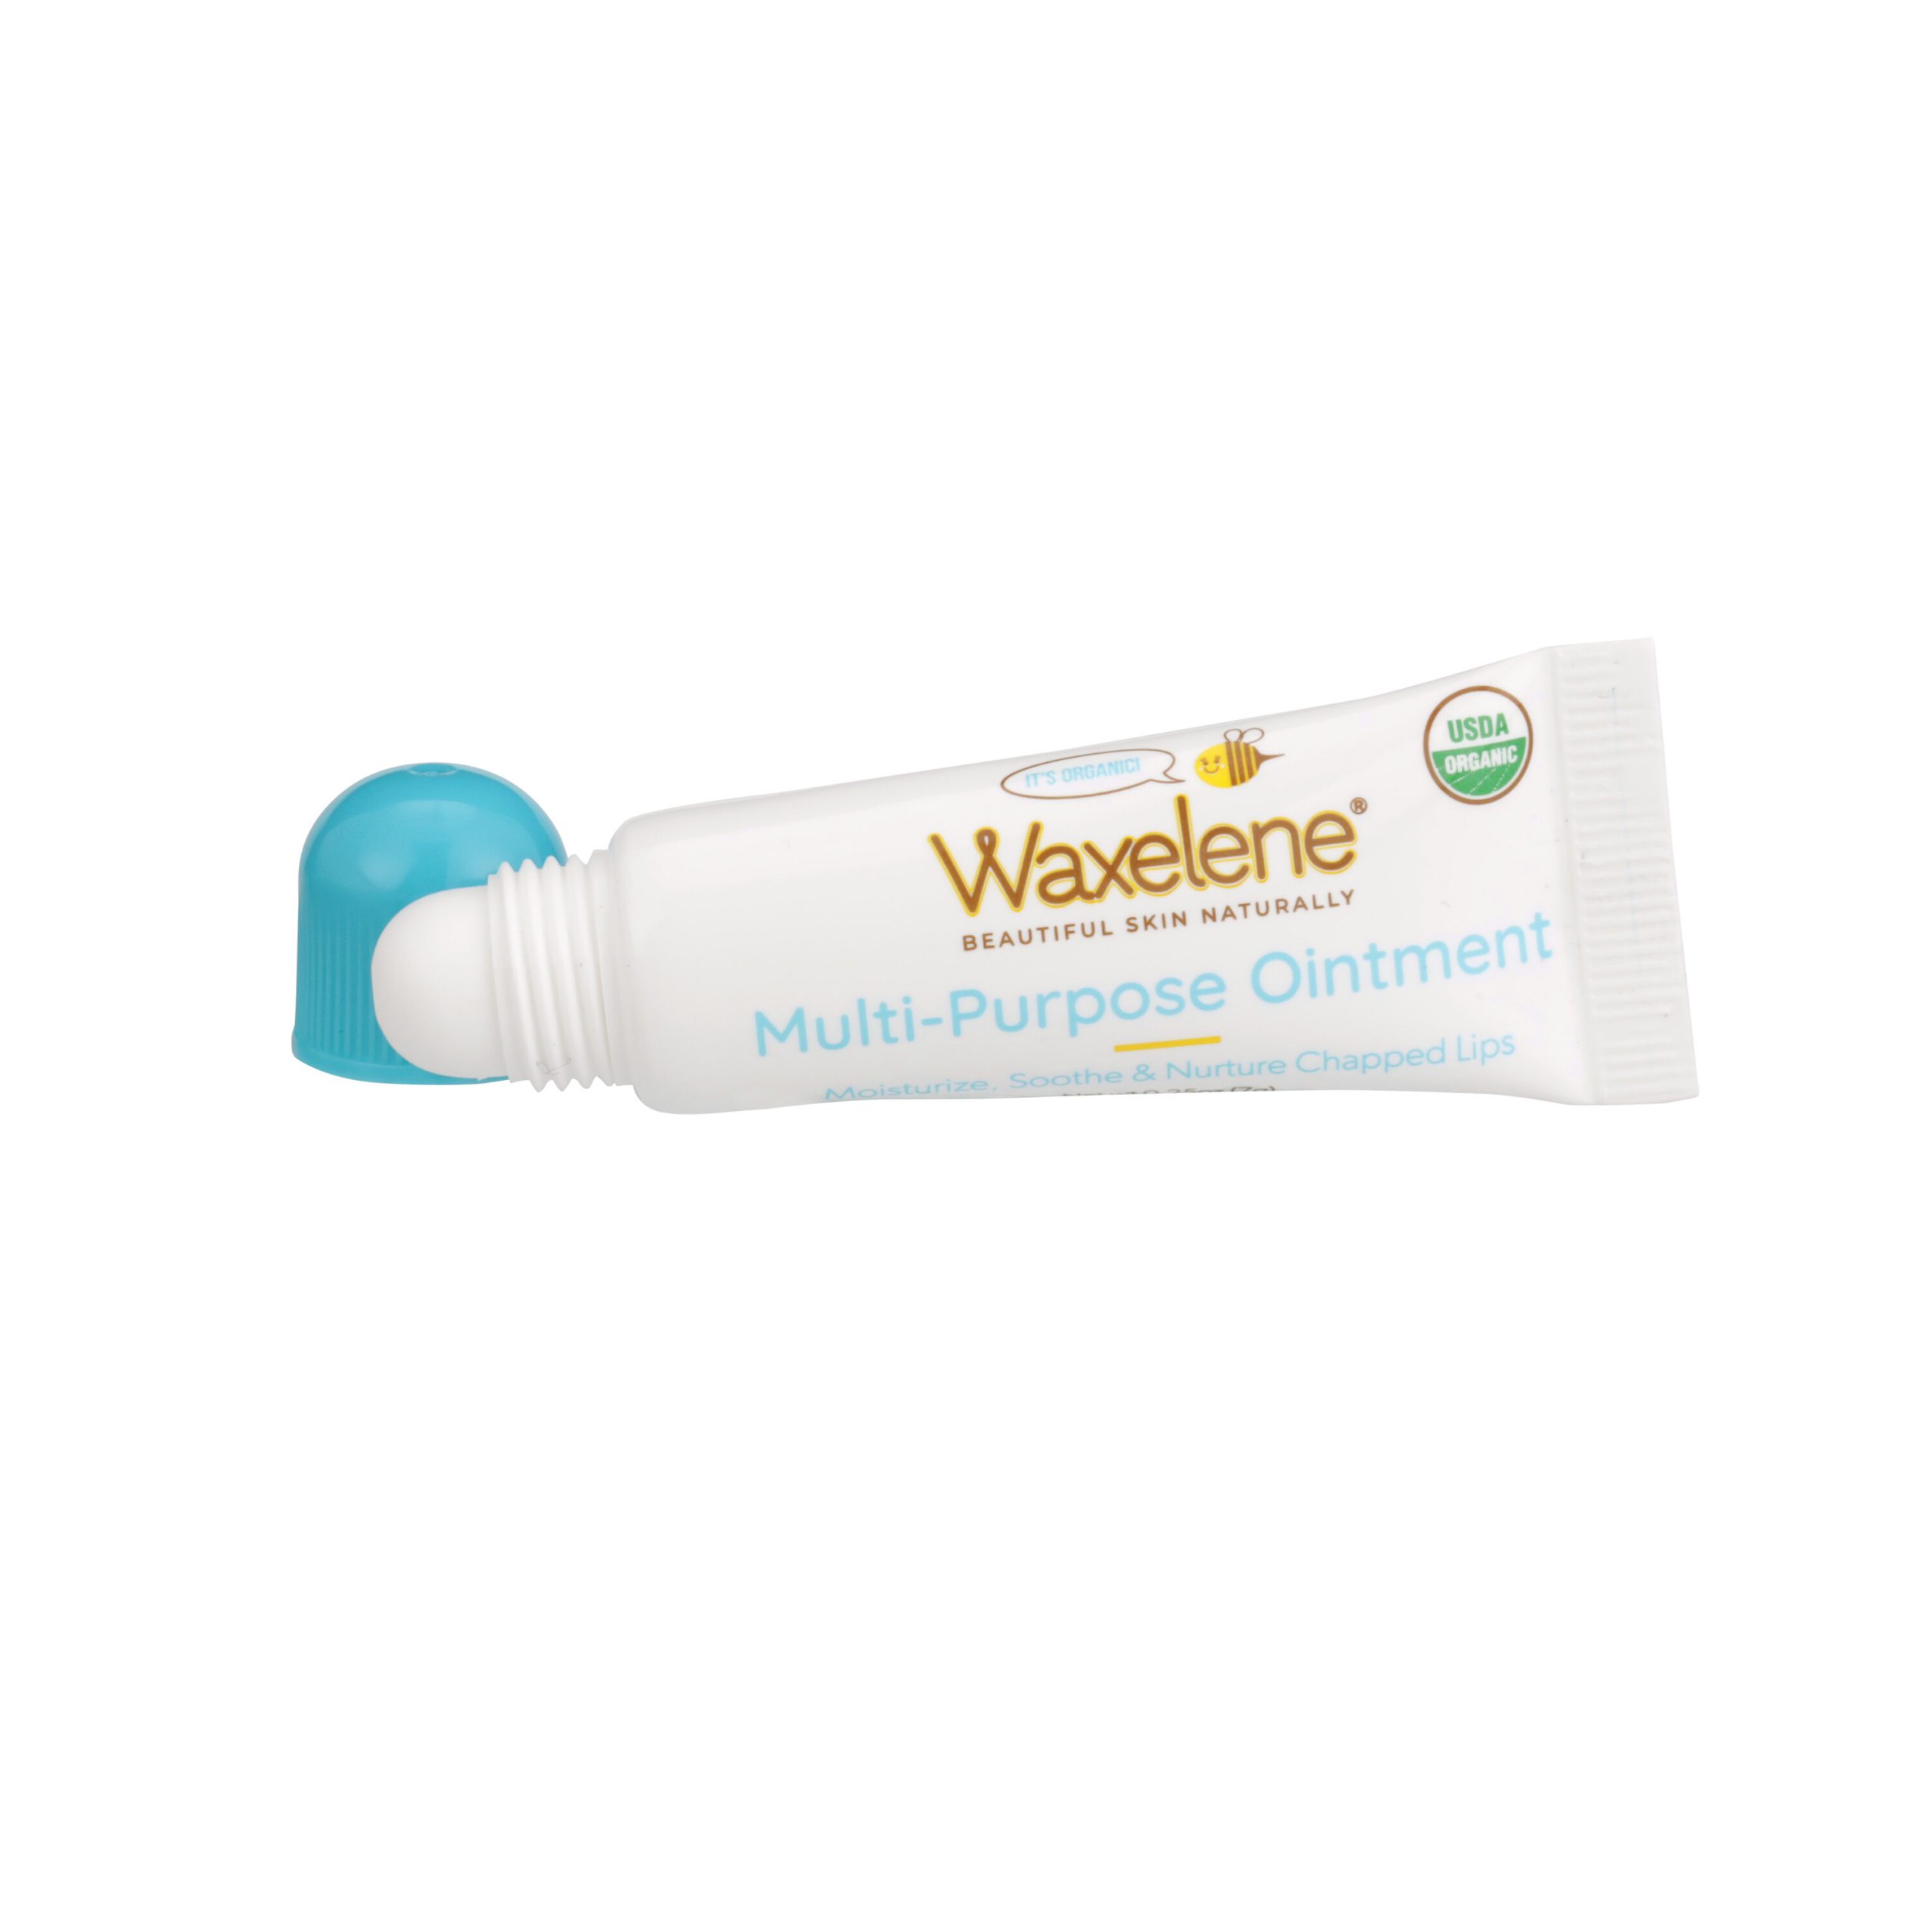 Waxelene -- a petroleum-free alternative for dry lips, elbows and feet.  YAY!